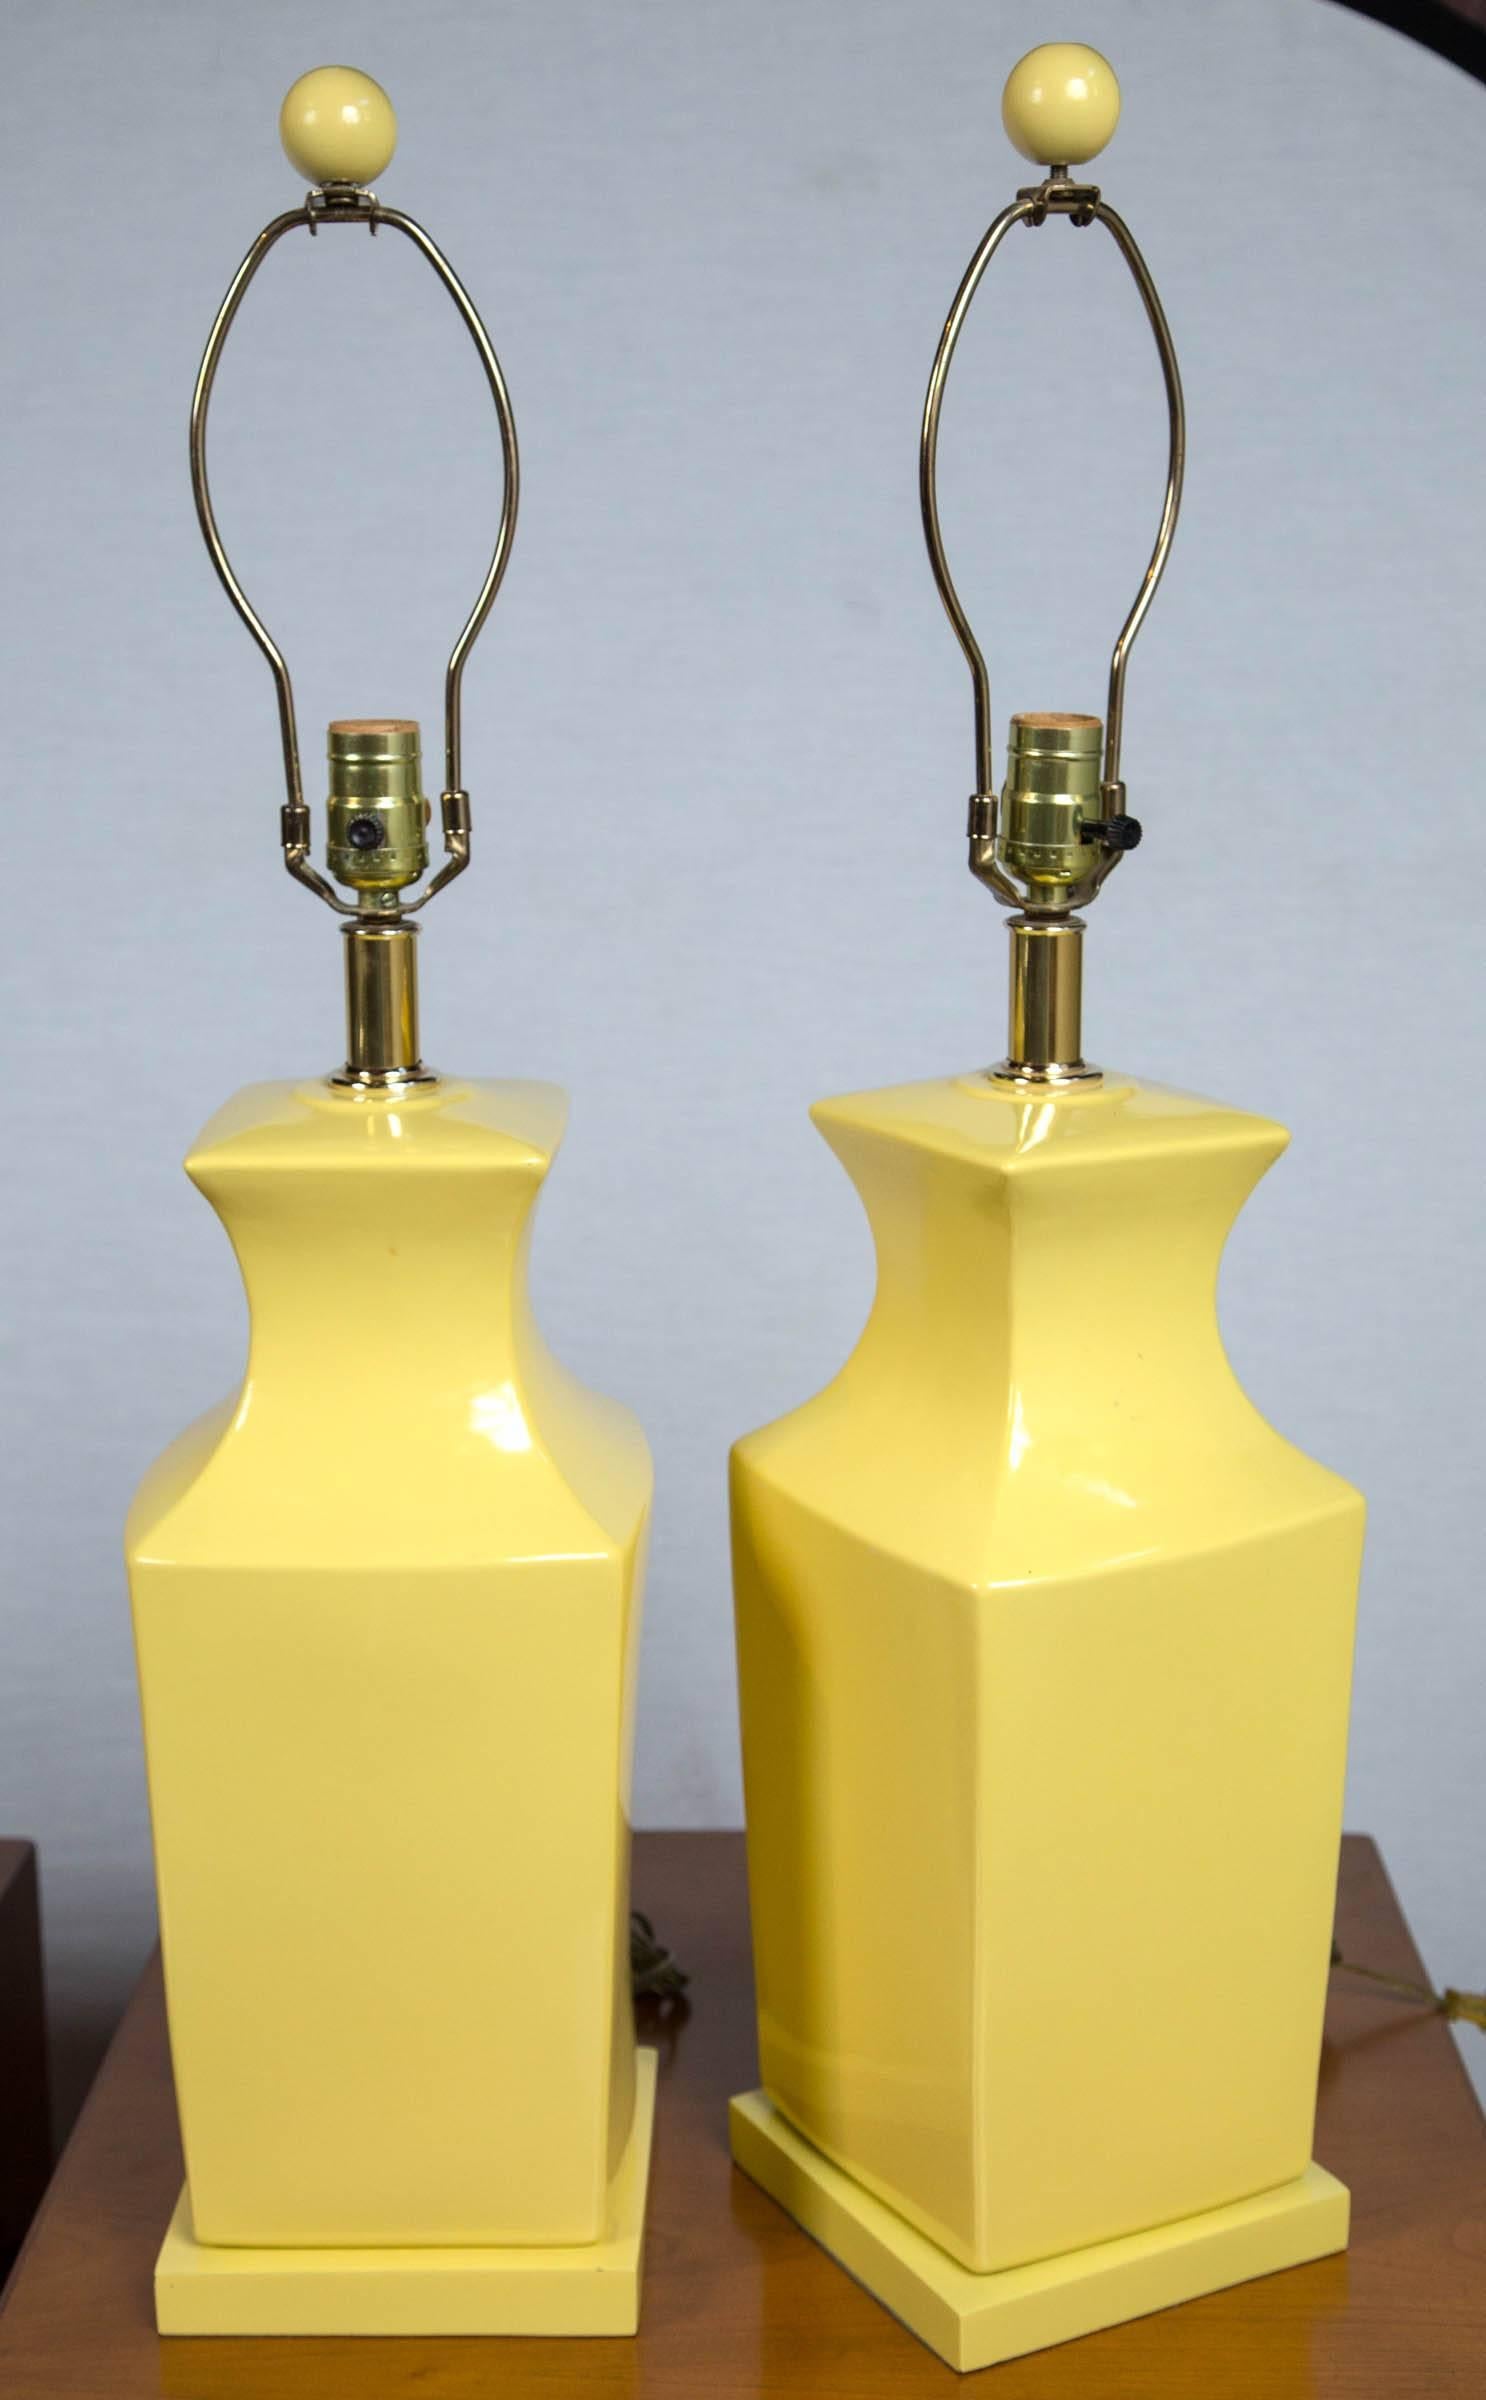 Pair of chinoiserie style yellow pottery lamps. Measures: 22